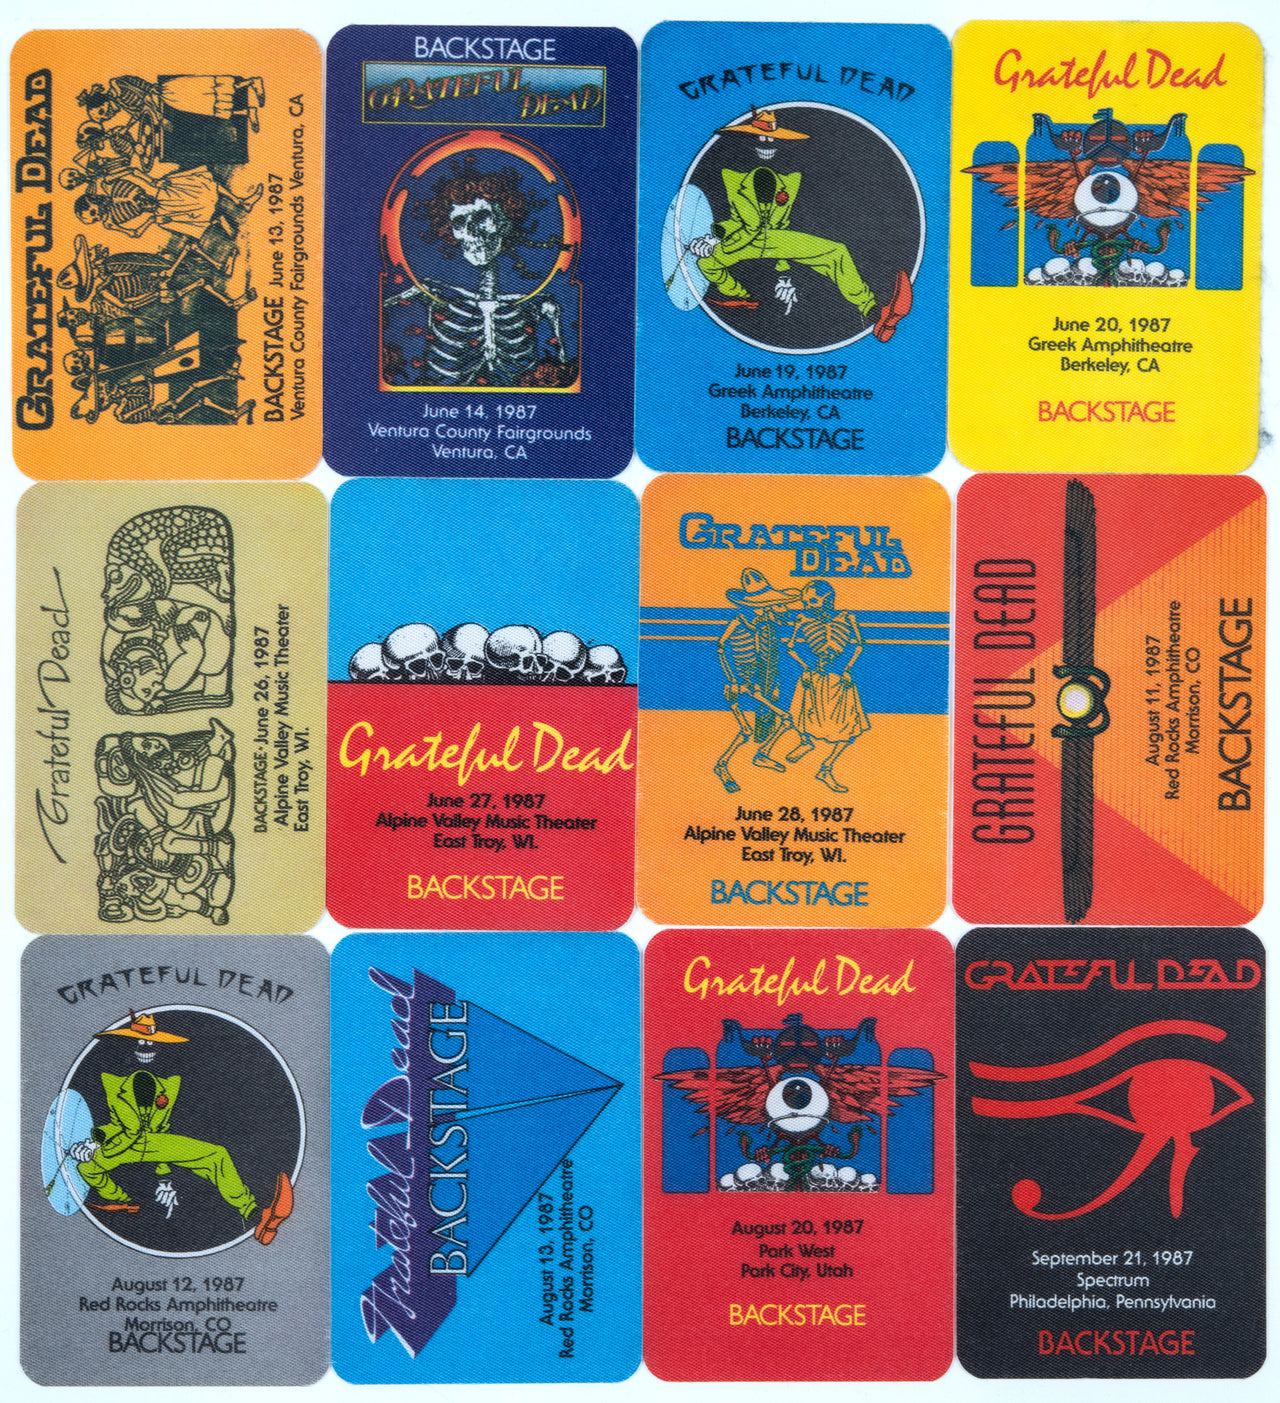 Grateful Dead Backstage Passes (6/13/1987 - 9/21/1987) from Dan Healy (1)